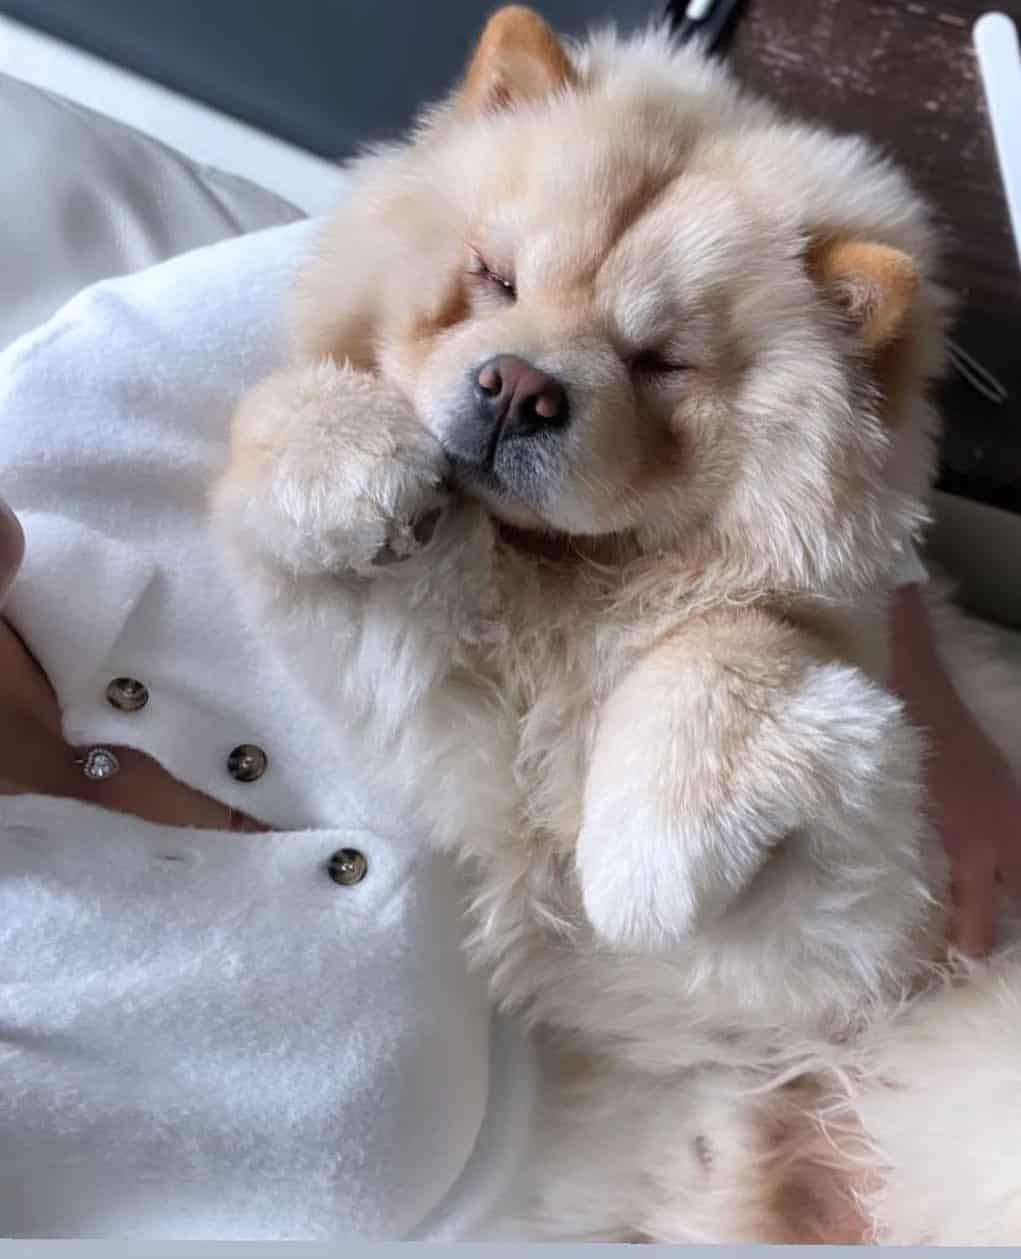 a mini chow chow in the arms of the person in the bed